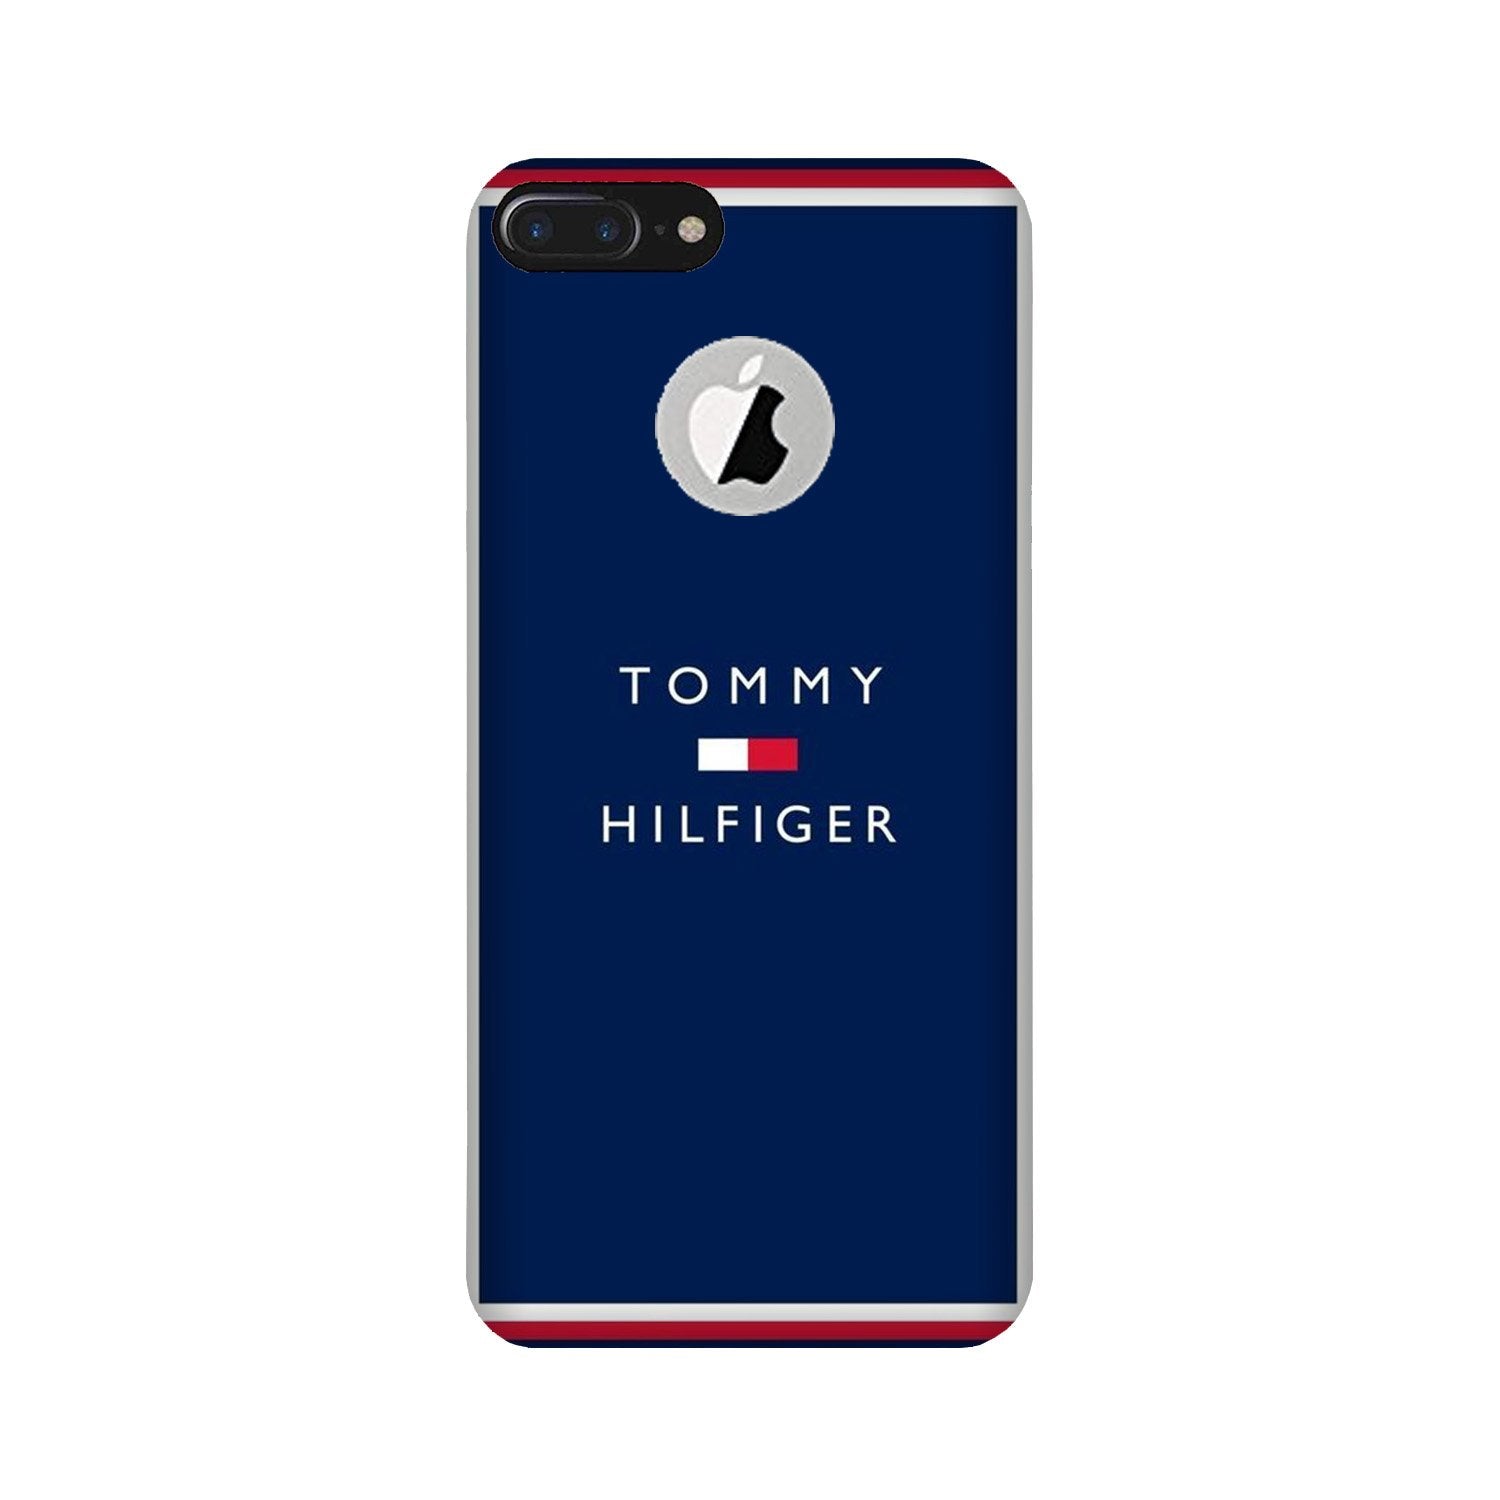 Katedral Poesi Op Tommy Hilfiger Mobile Back Case for iPhone 7 Plus logo cut (Design - 2 –  theStyleO